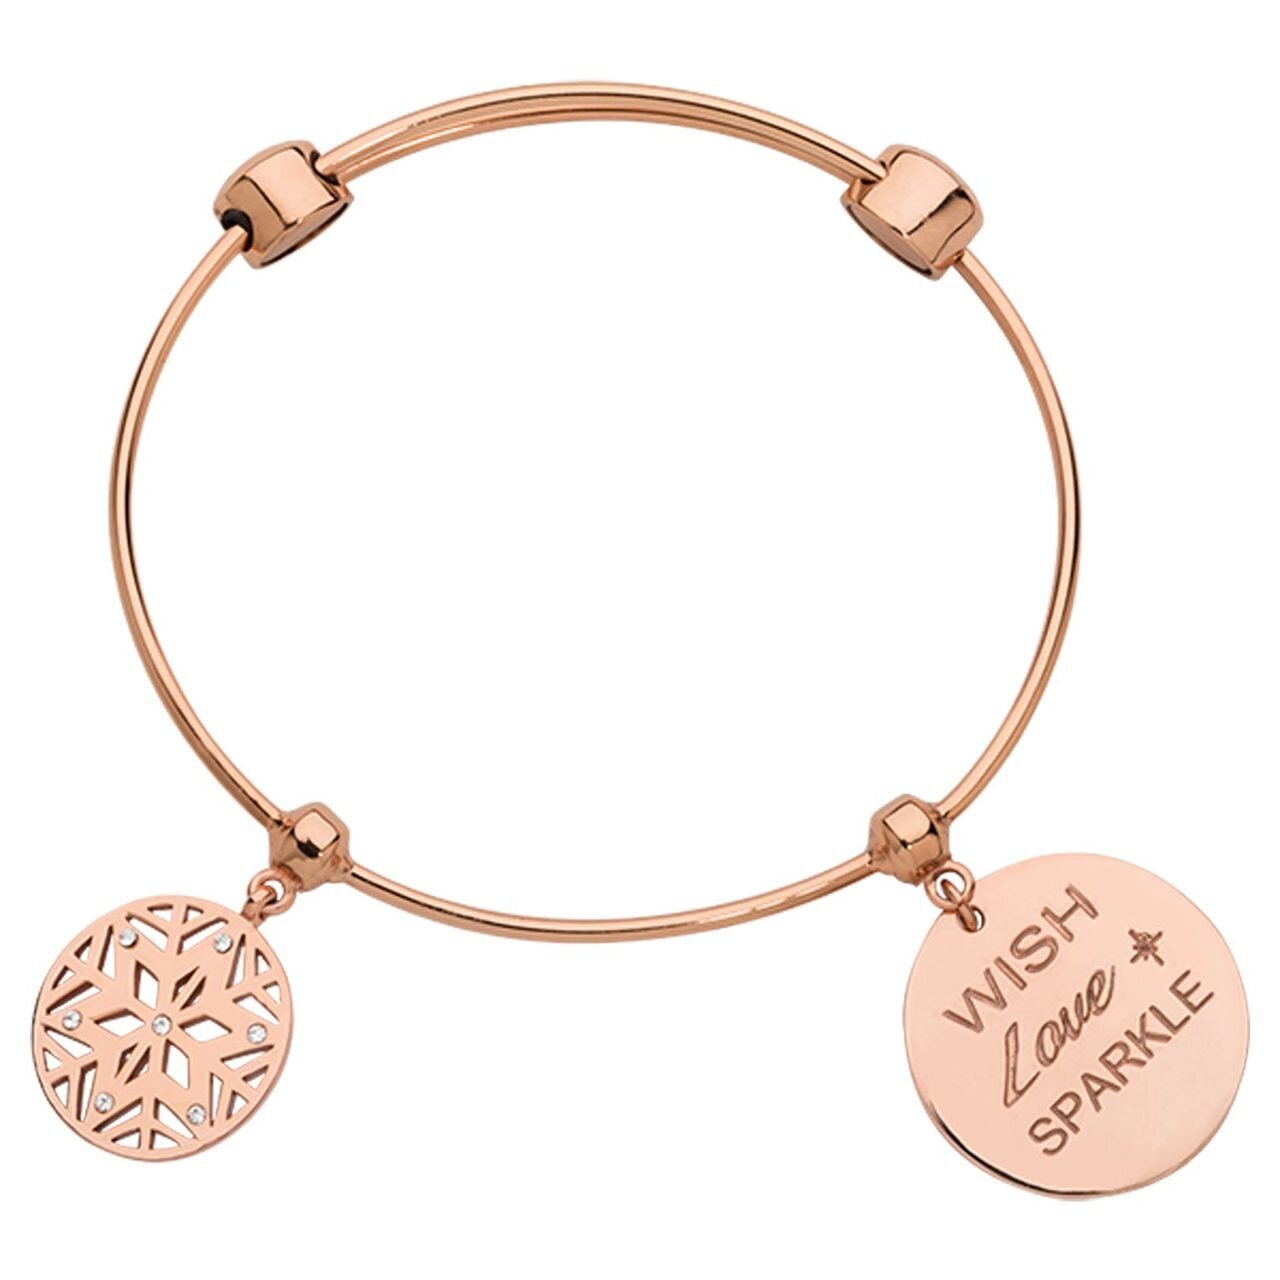 Nikki Lissoni Charm Bangle with Two Fixed Charms Snowflake Wish Love Sparkle Rose Gold-plated 17cm B1163RG17